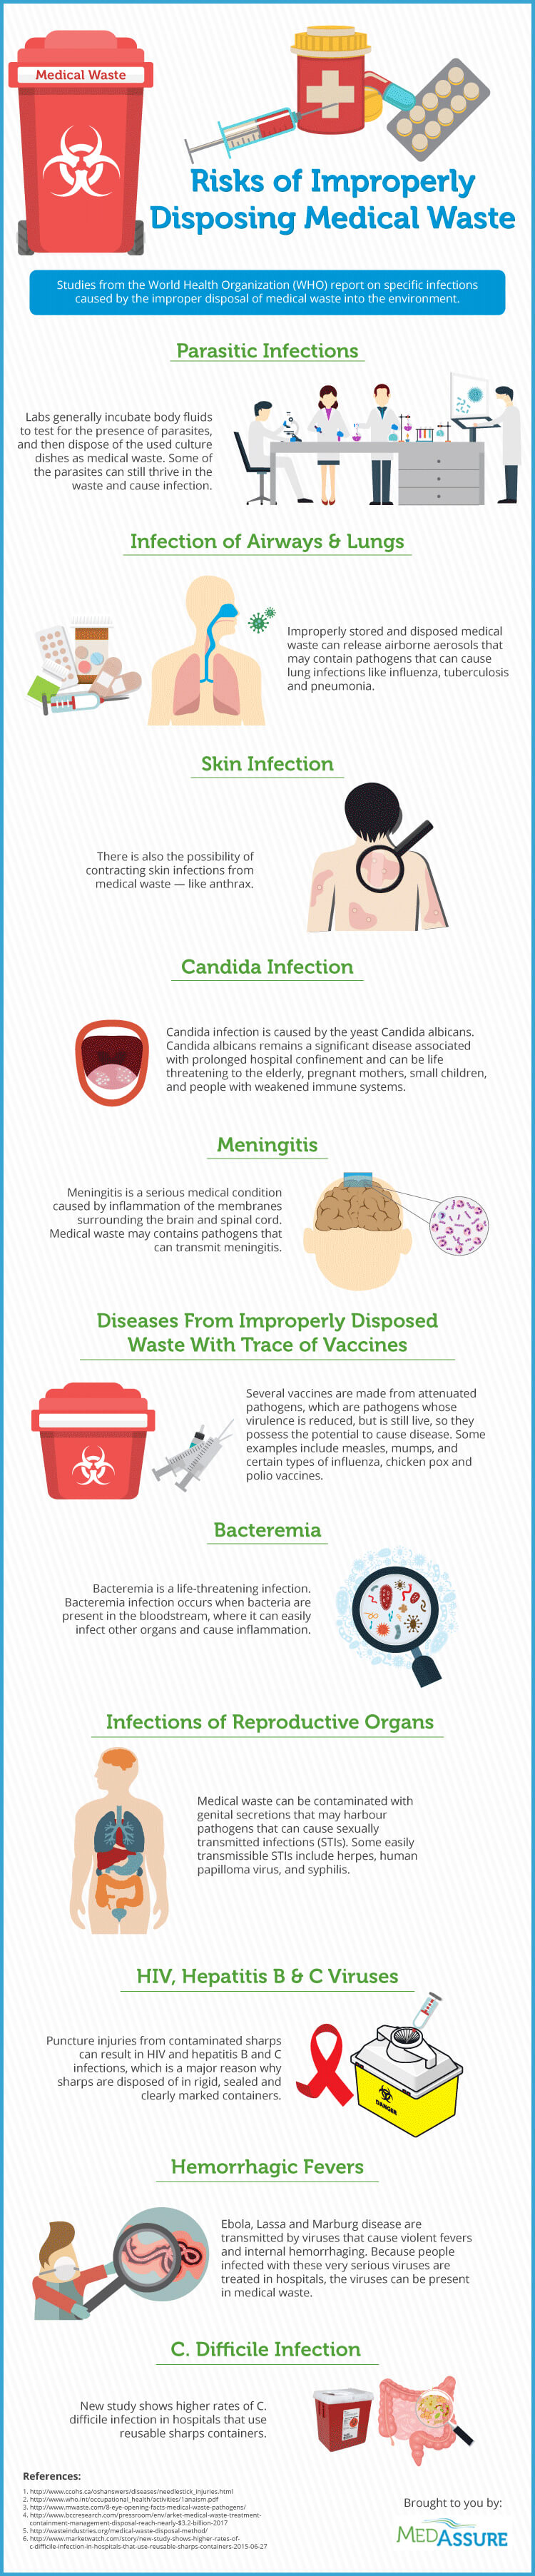 Risks-of-Improperly-Disposing-Medical-Waste-animated-infographic